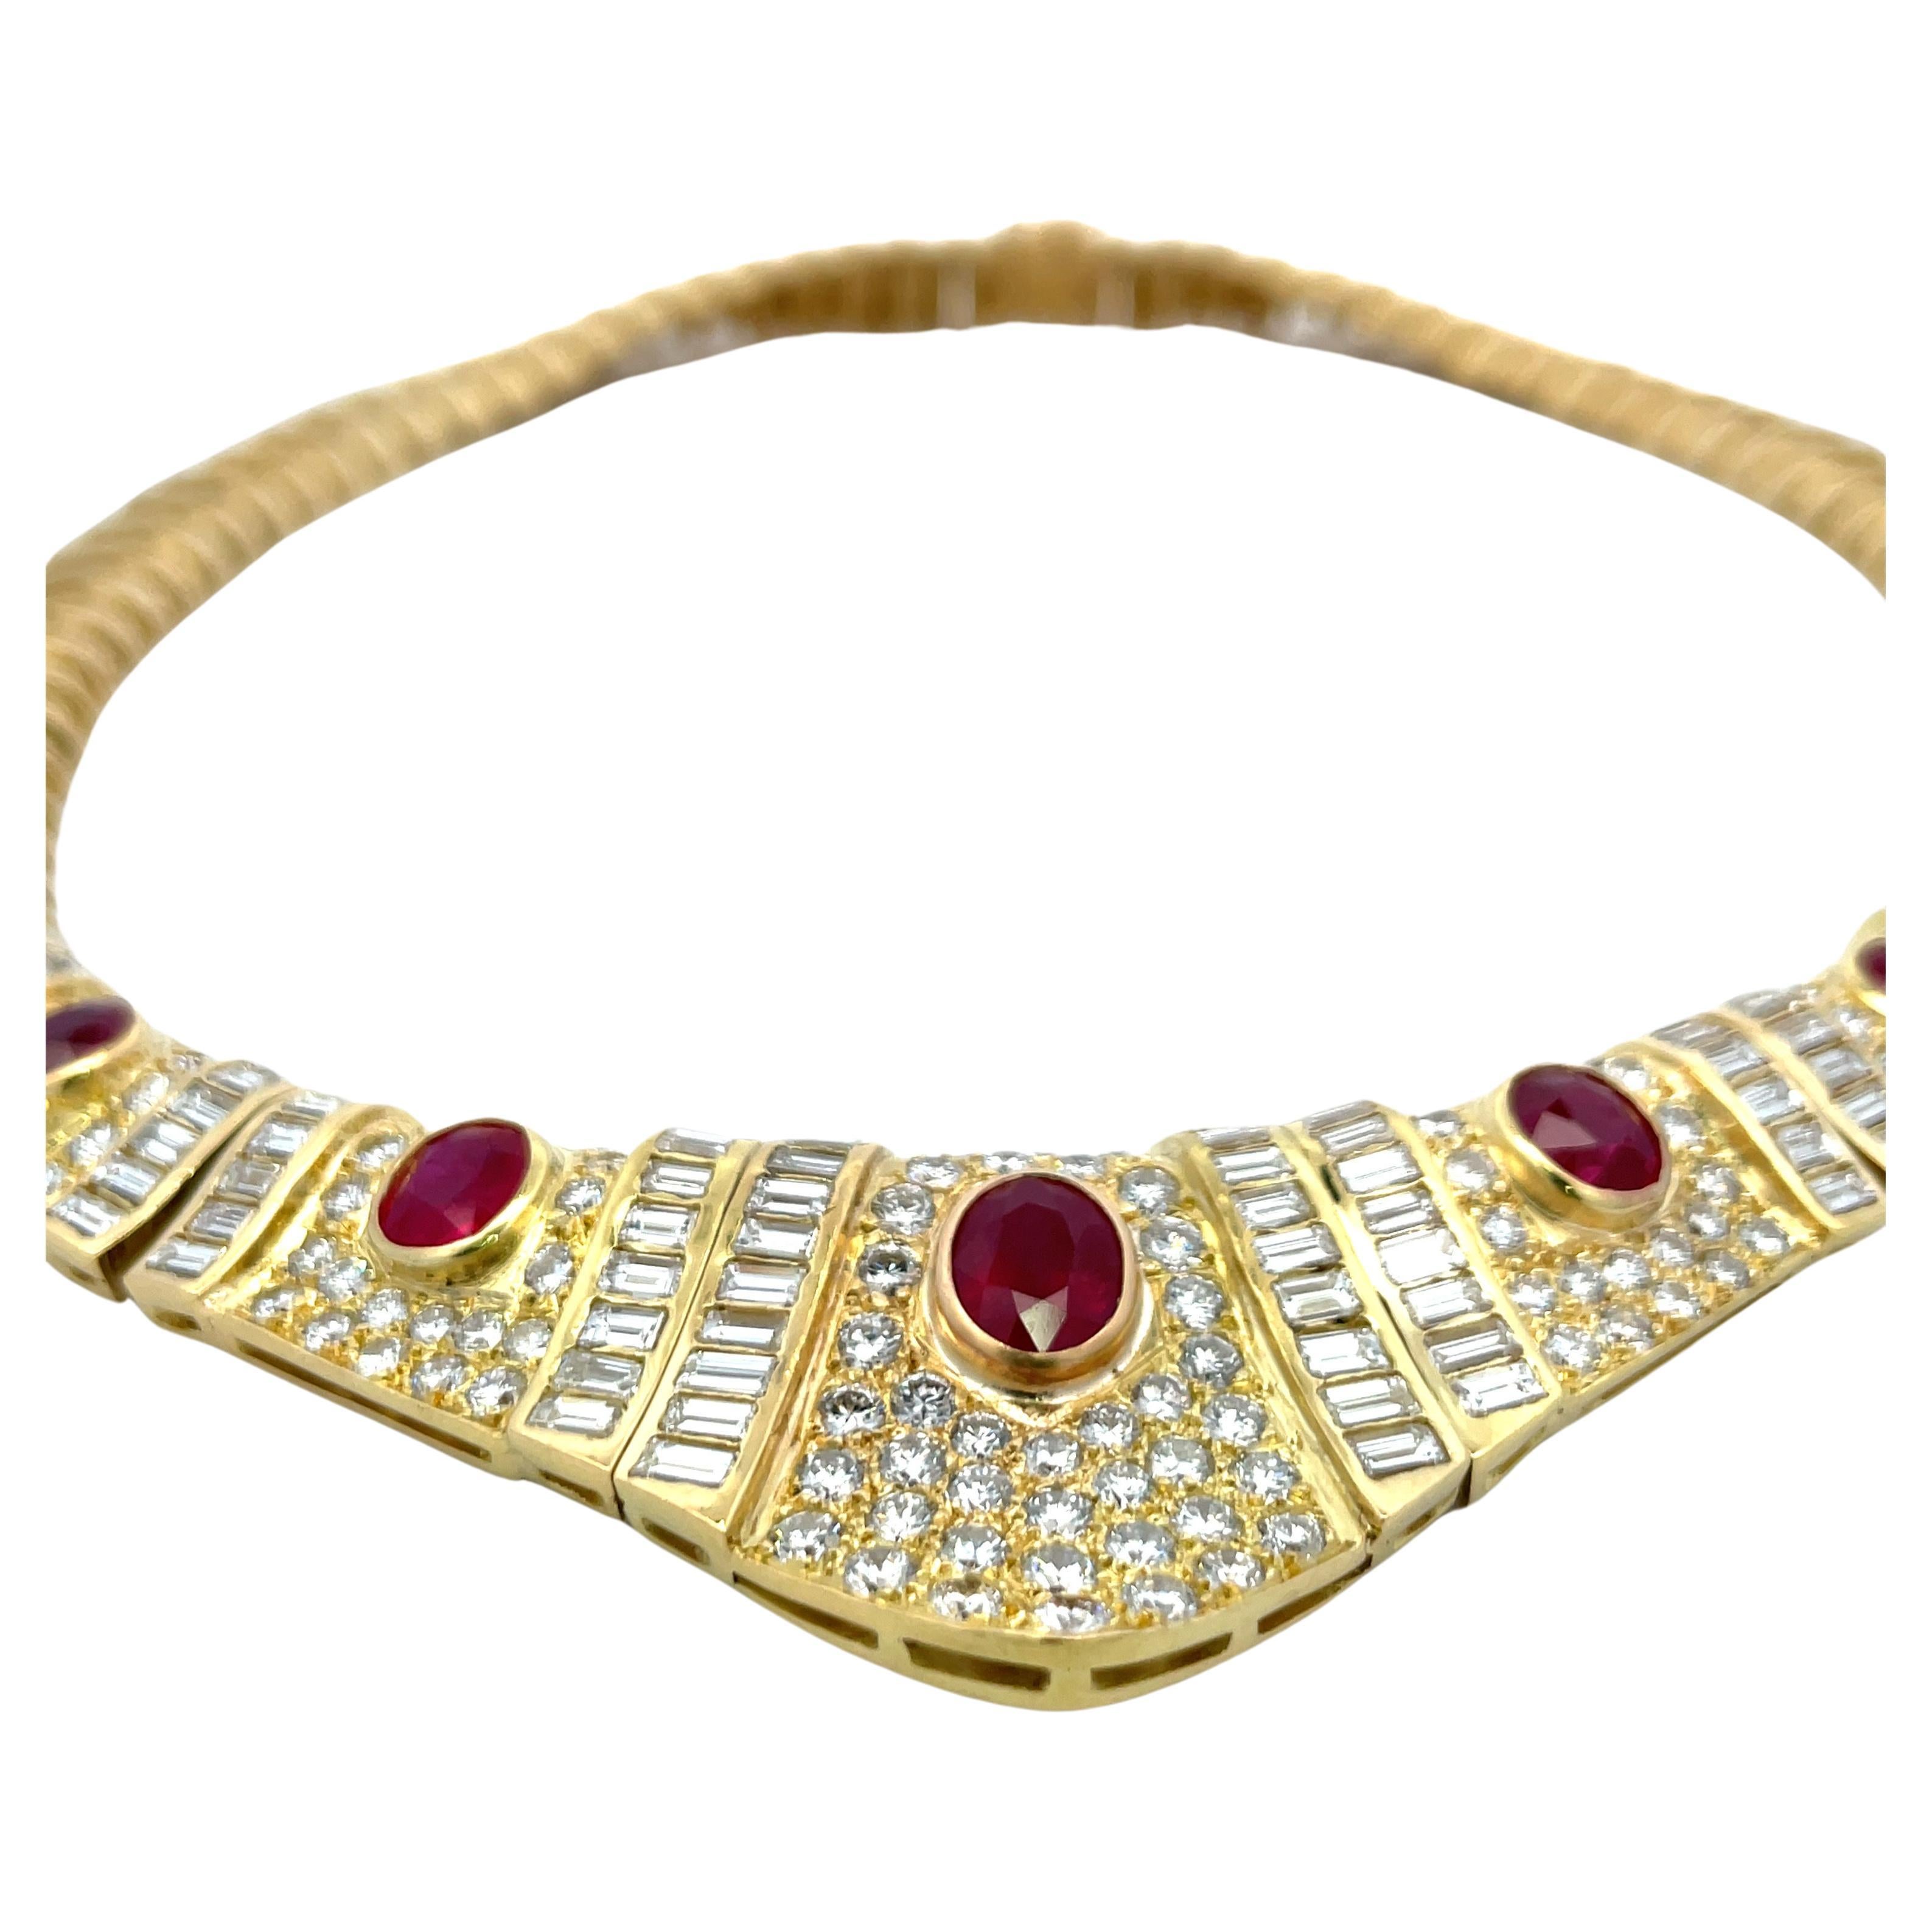 Vintage 18 Karat yellow gold collar necklace featuring 5 Oval Burma Rubies weighing 7.50 Carats, Heated, flanked with baguette and round brilliants weighing approximately 17 carats.
